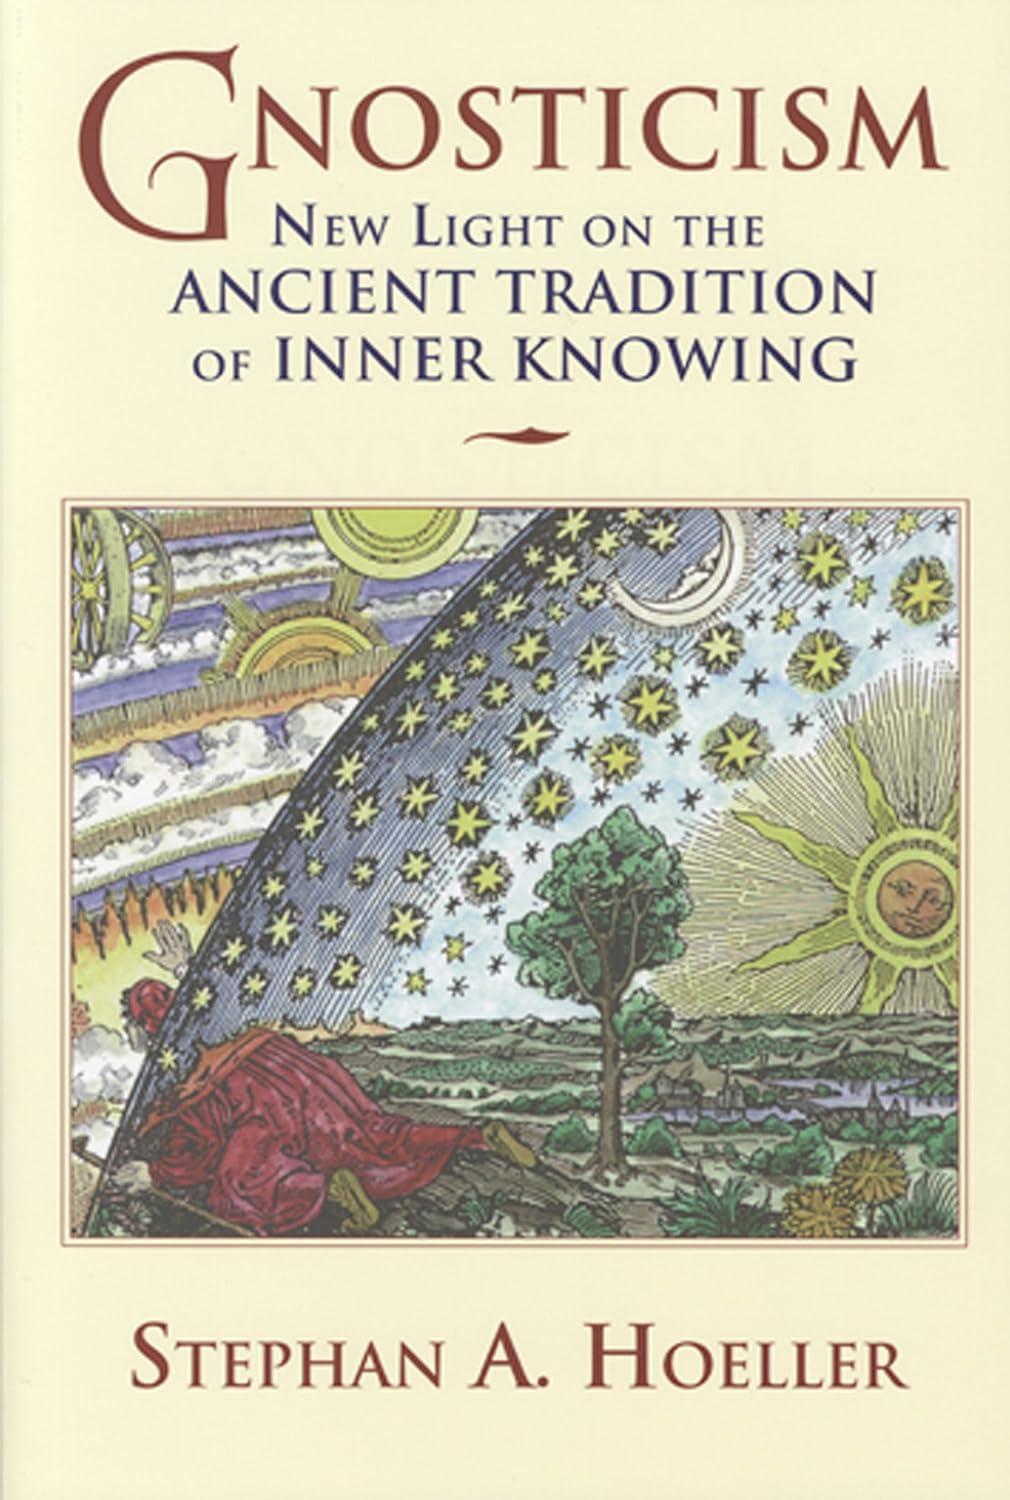 Red Wheel/Weiser Gnosticism: New Light on the Ancient Tradition of Inner Knowing